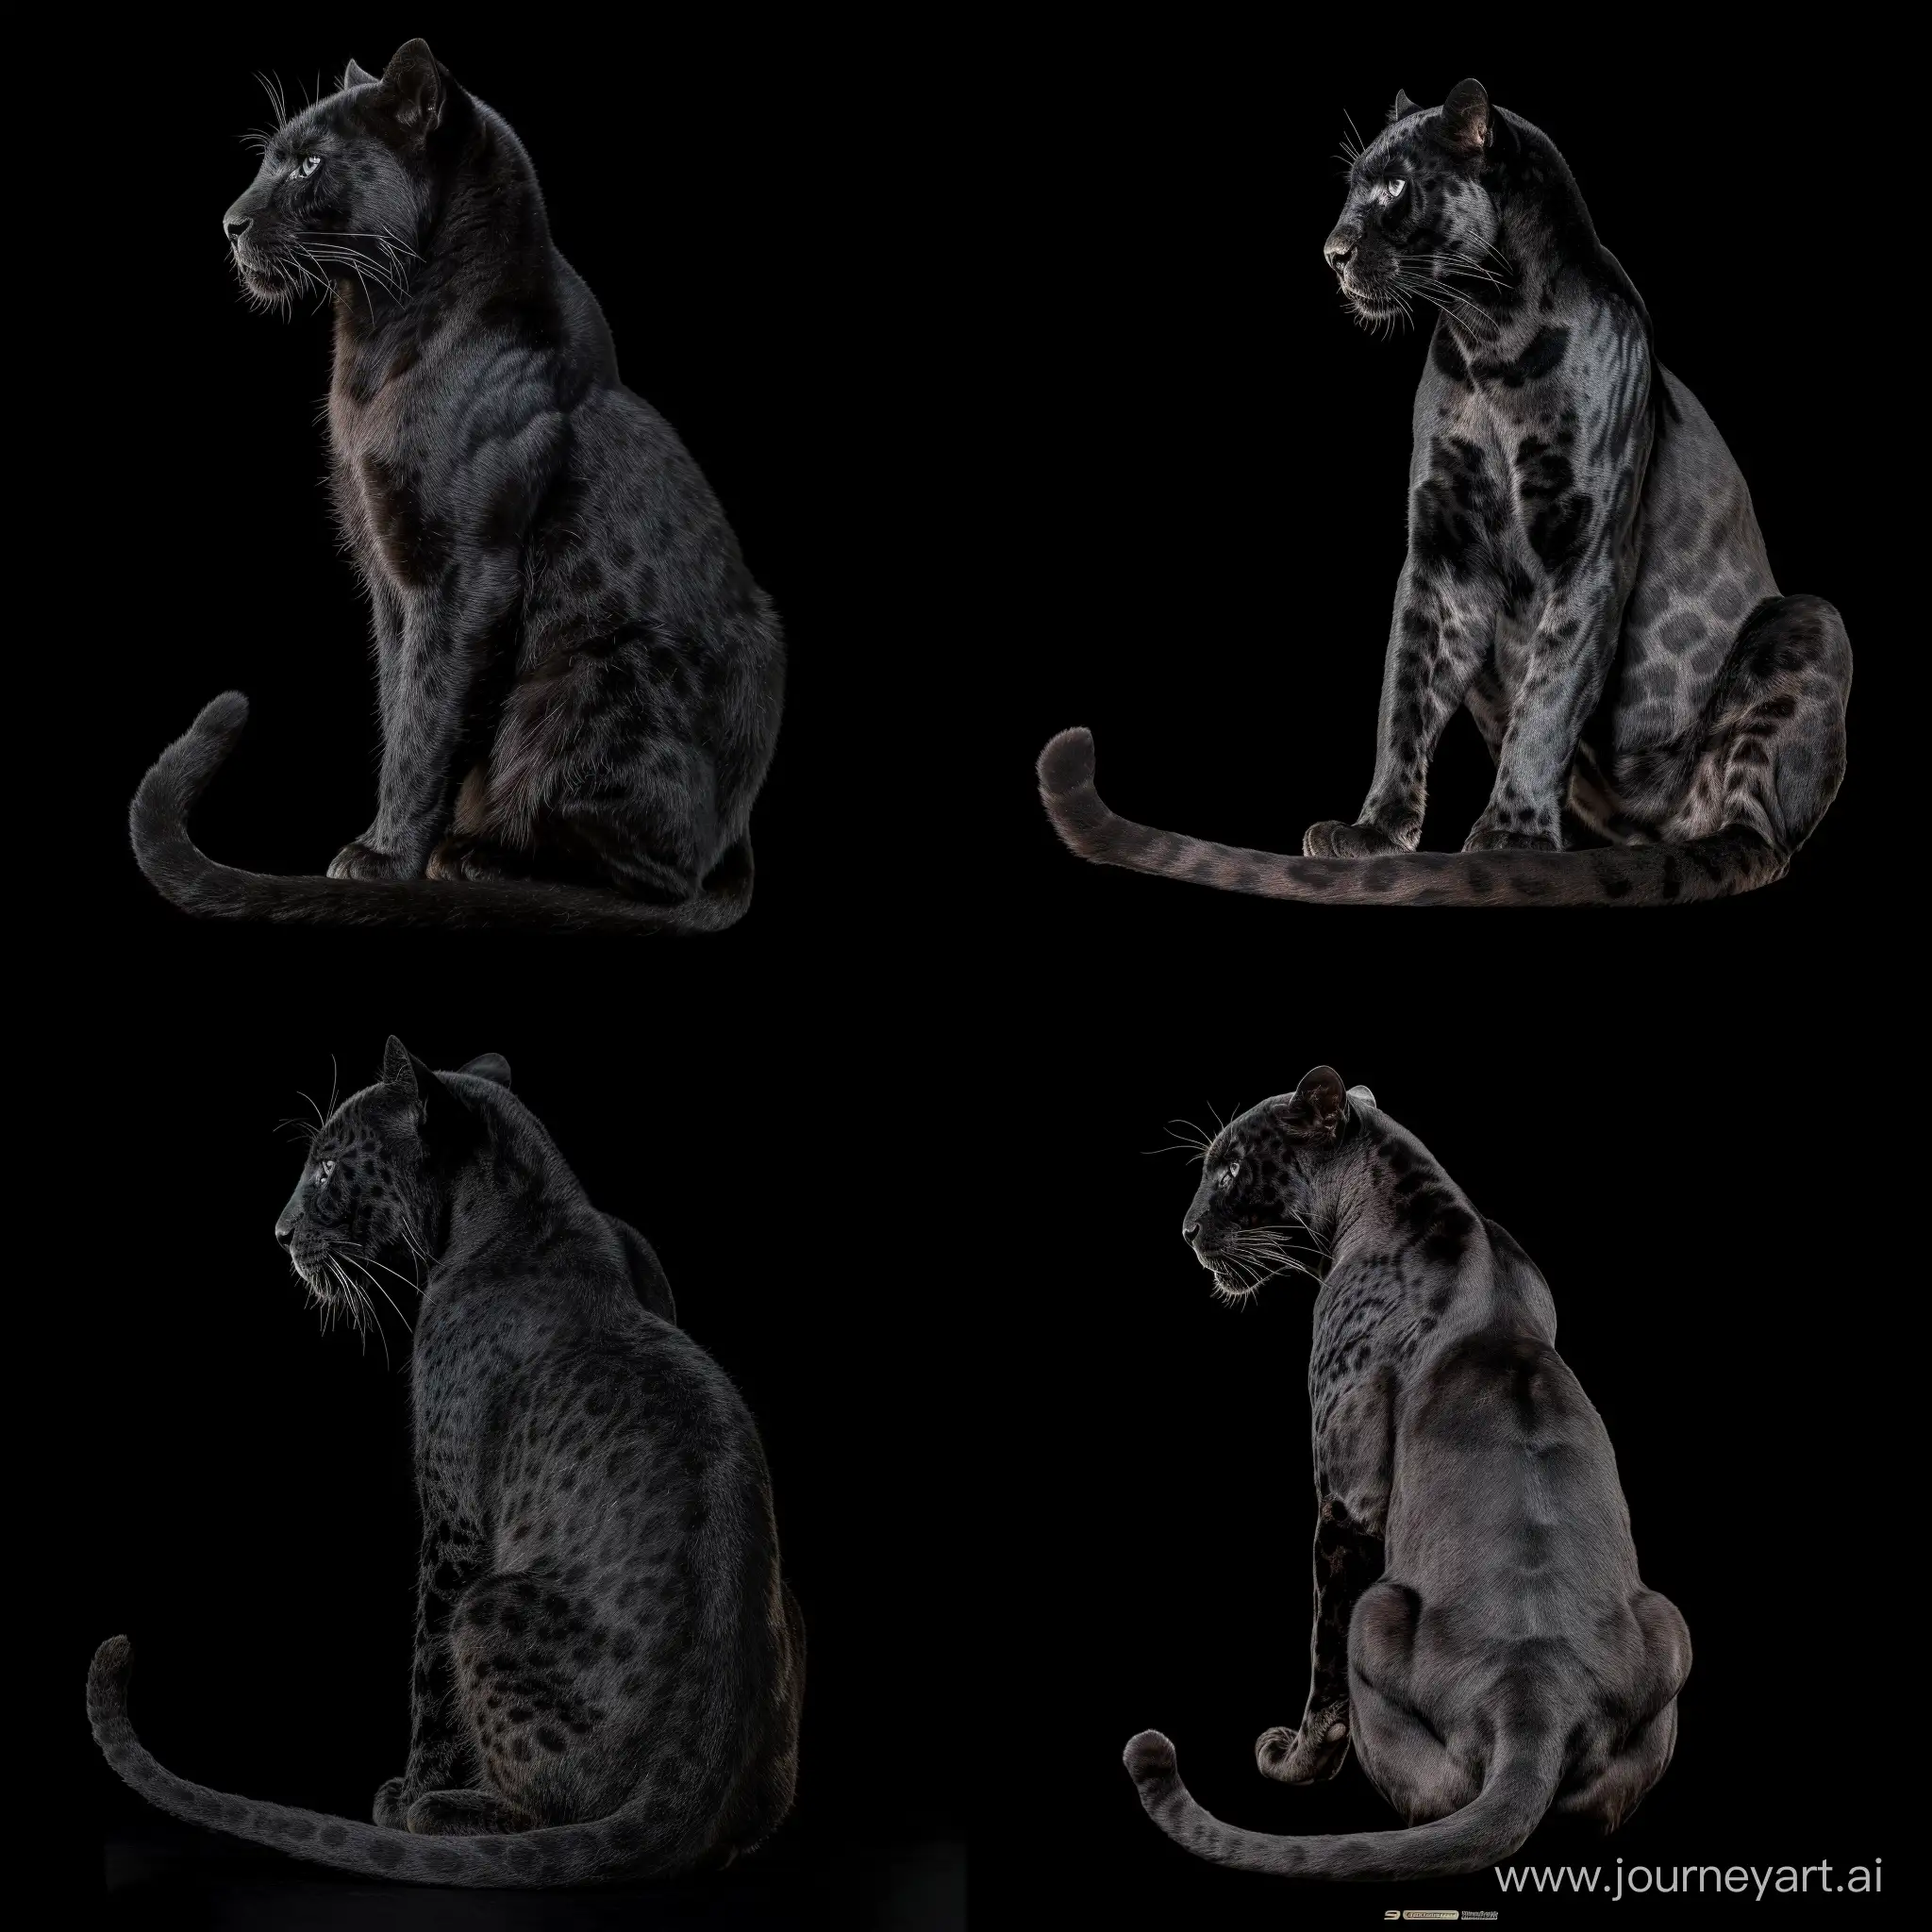 Majestic-Black-Panther-Gracefully-Sitting-on-a-Seamless-Black-Background